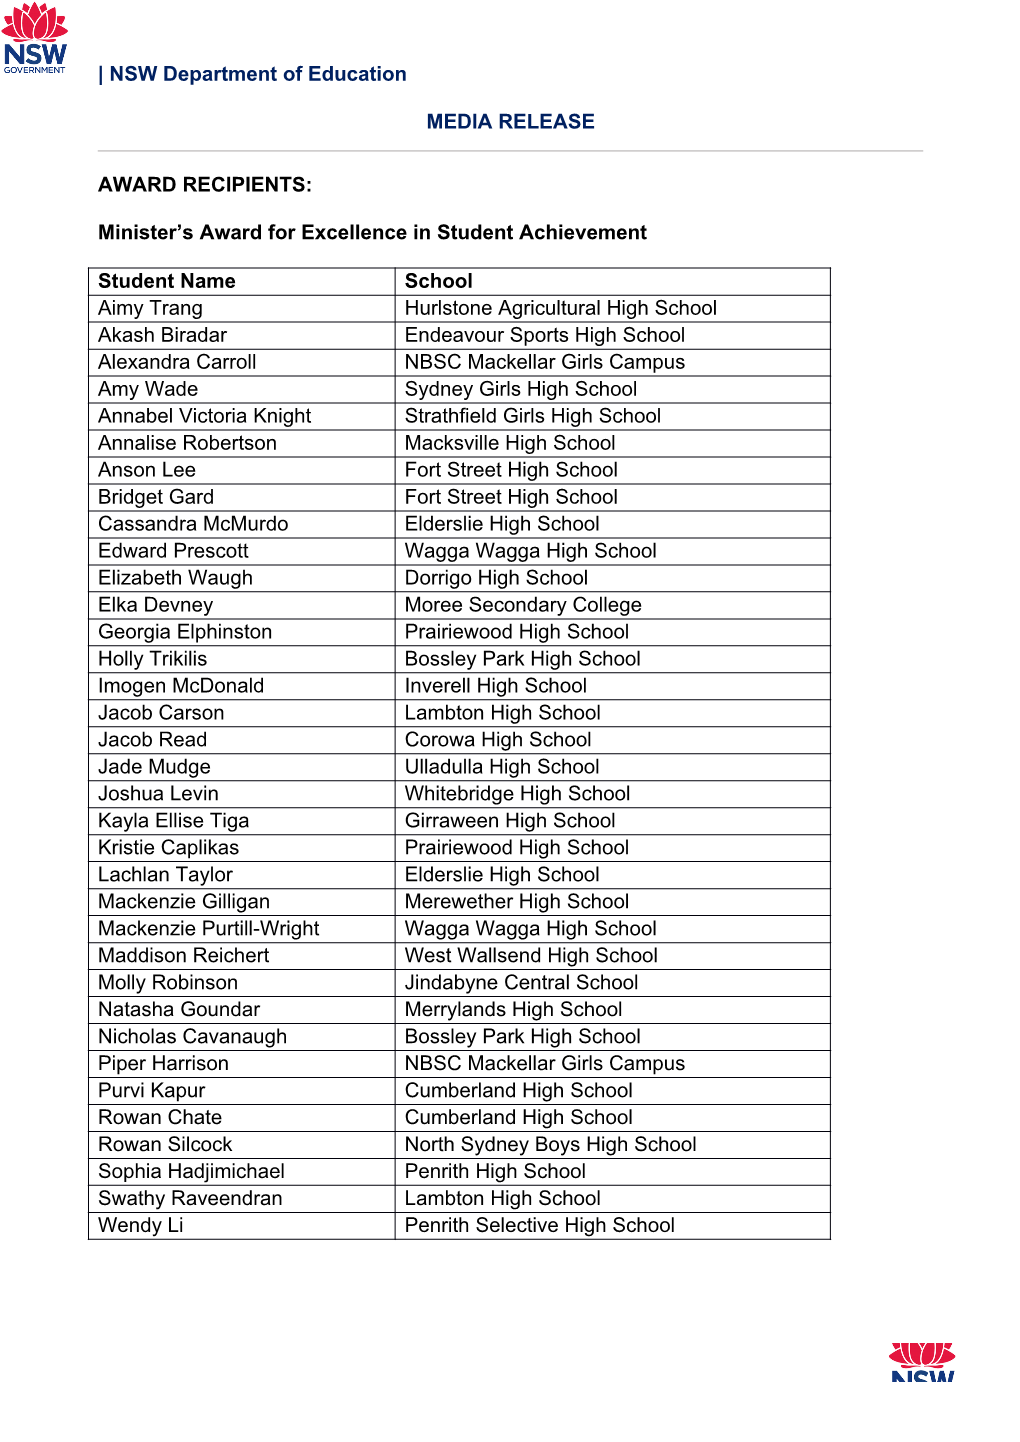 NSW Department of Education MEDIA RELEASE AWARD RECIPIENTS